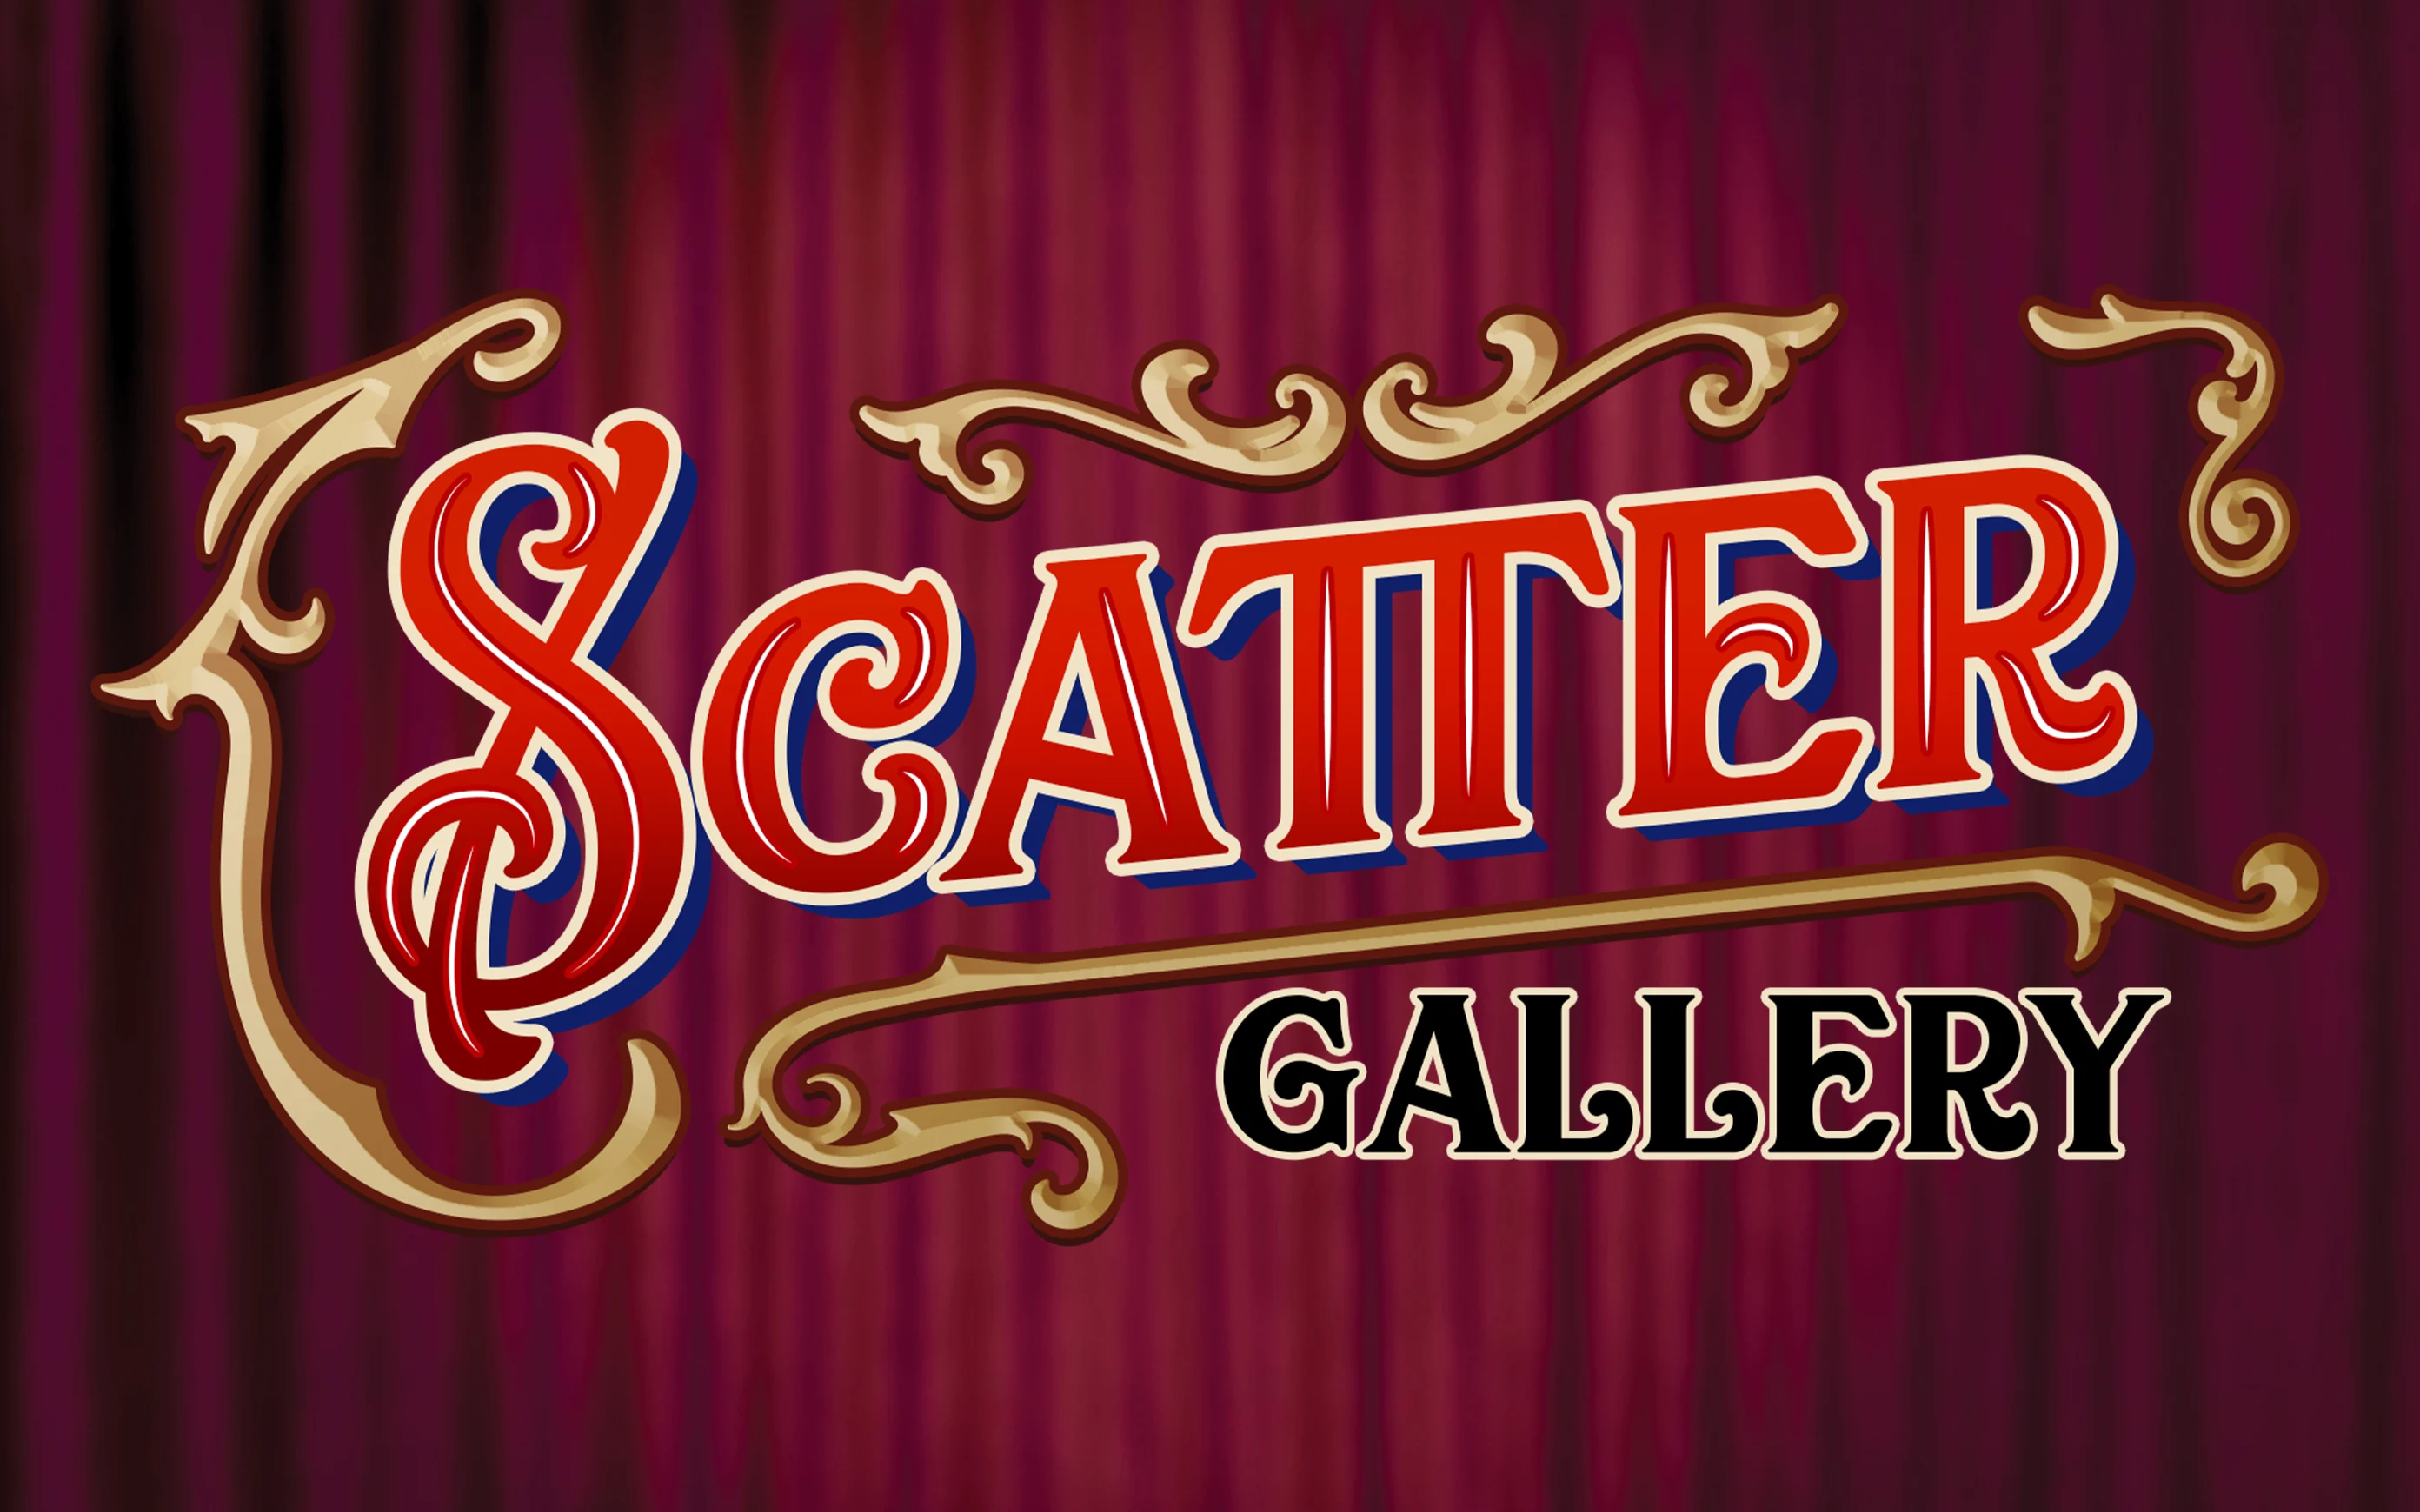 Play Scatter Gallery on Starcasinodice.be online casino